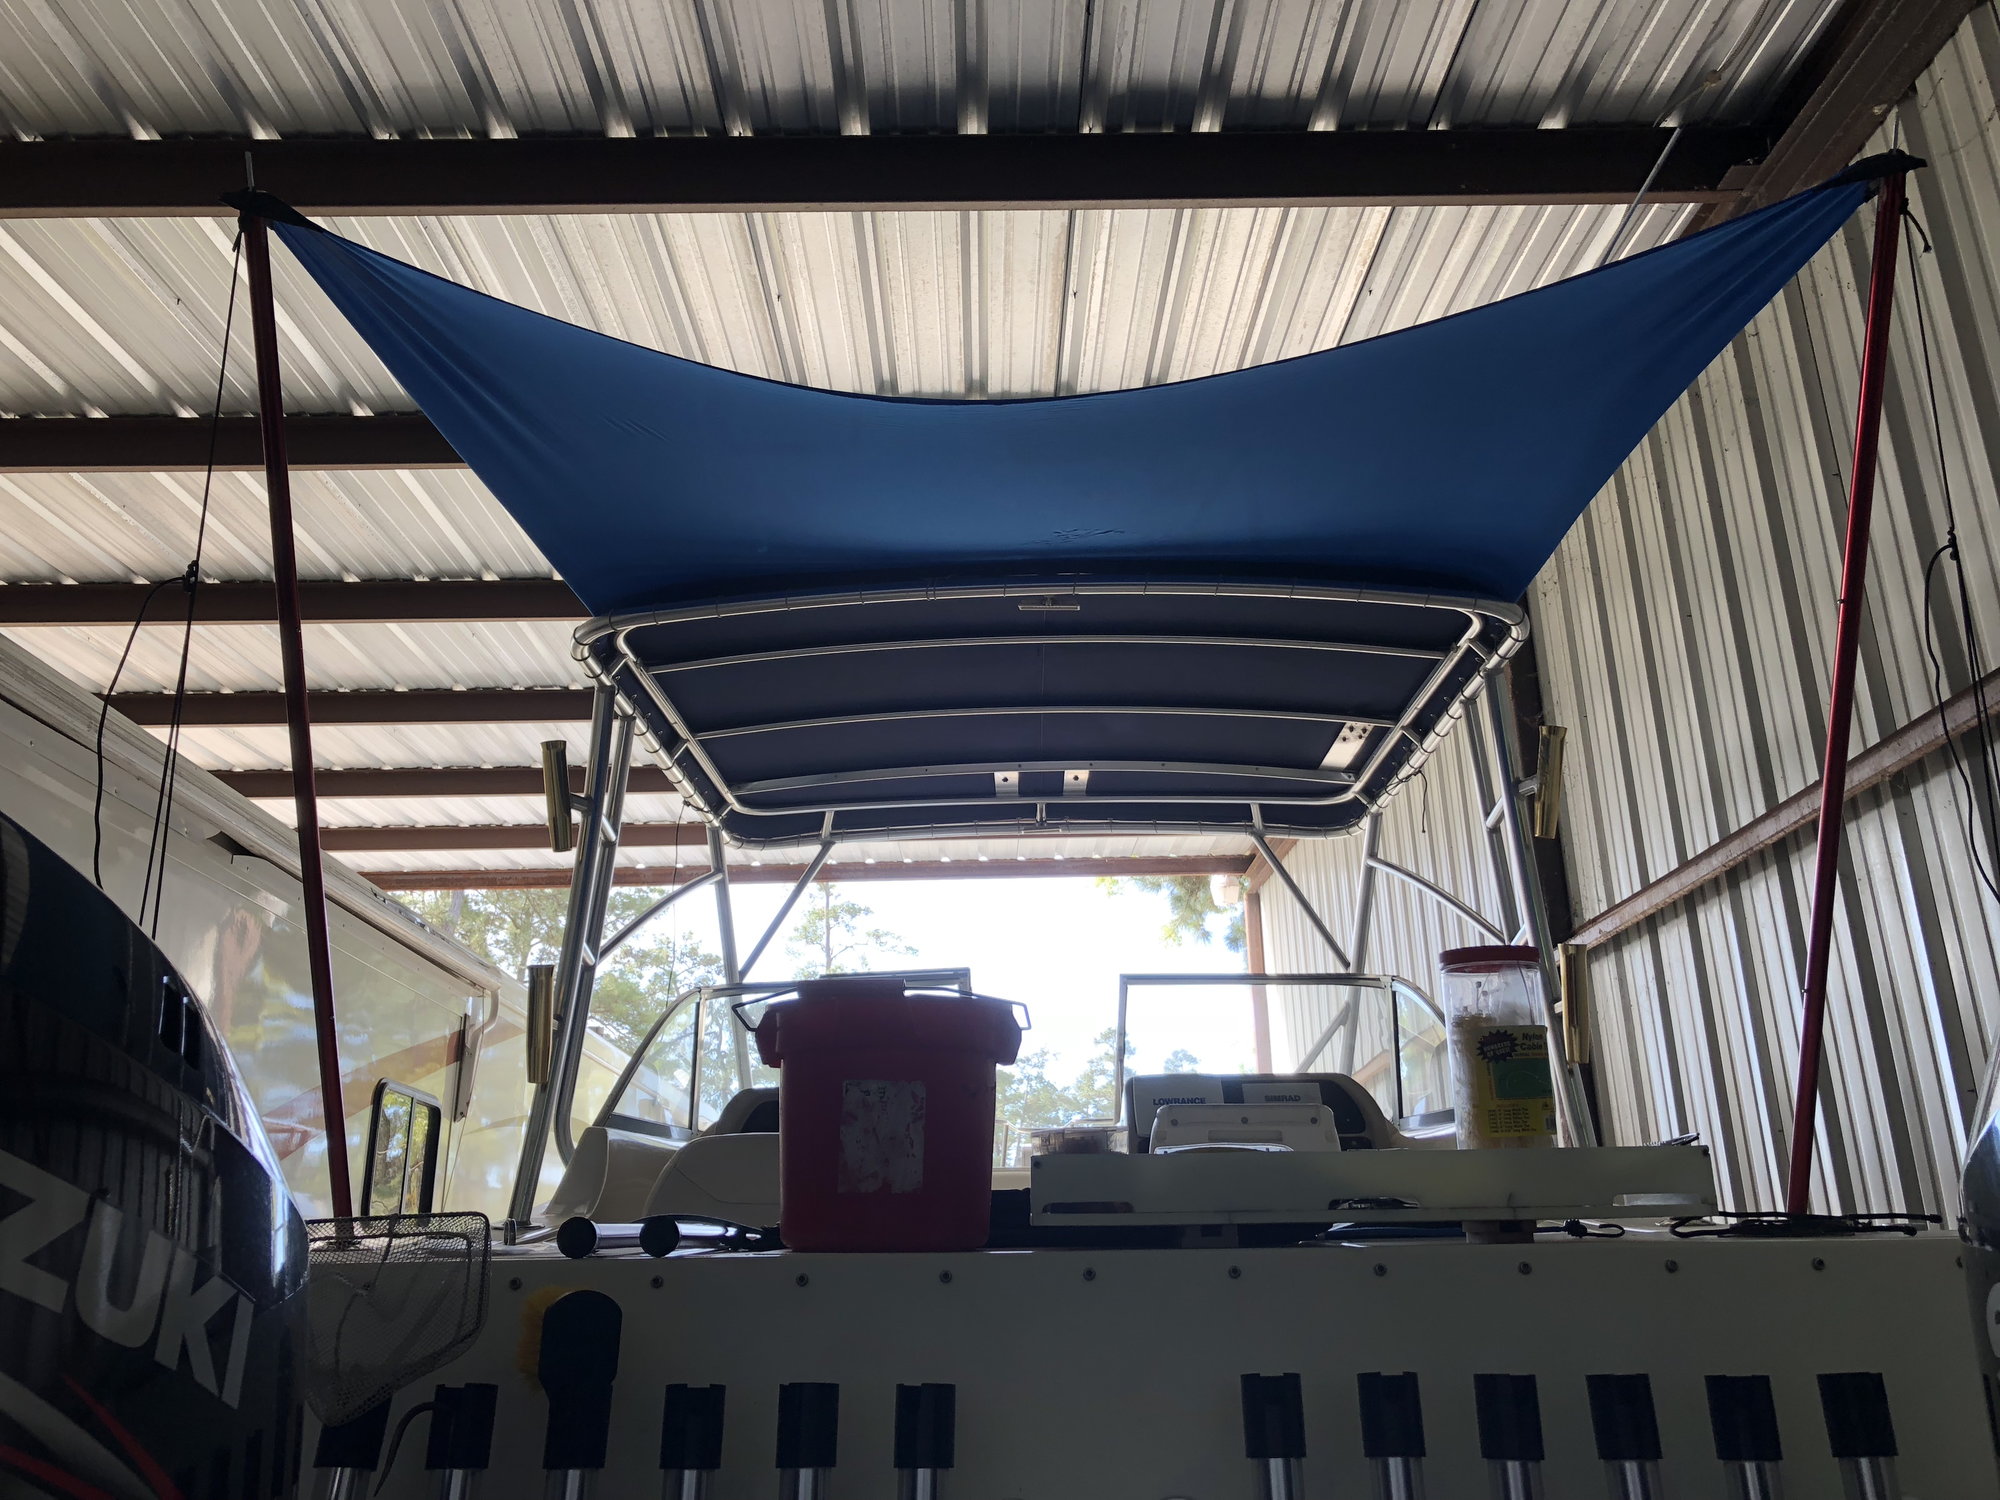 Fiberglass t-top diy - The Hull Truth - Boating and Fishing Forum